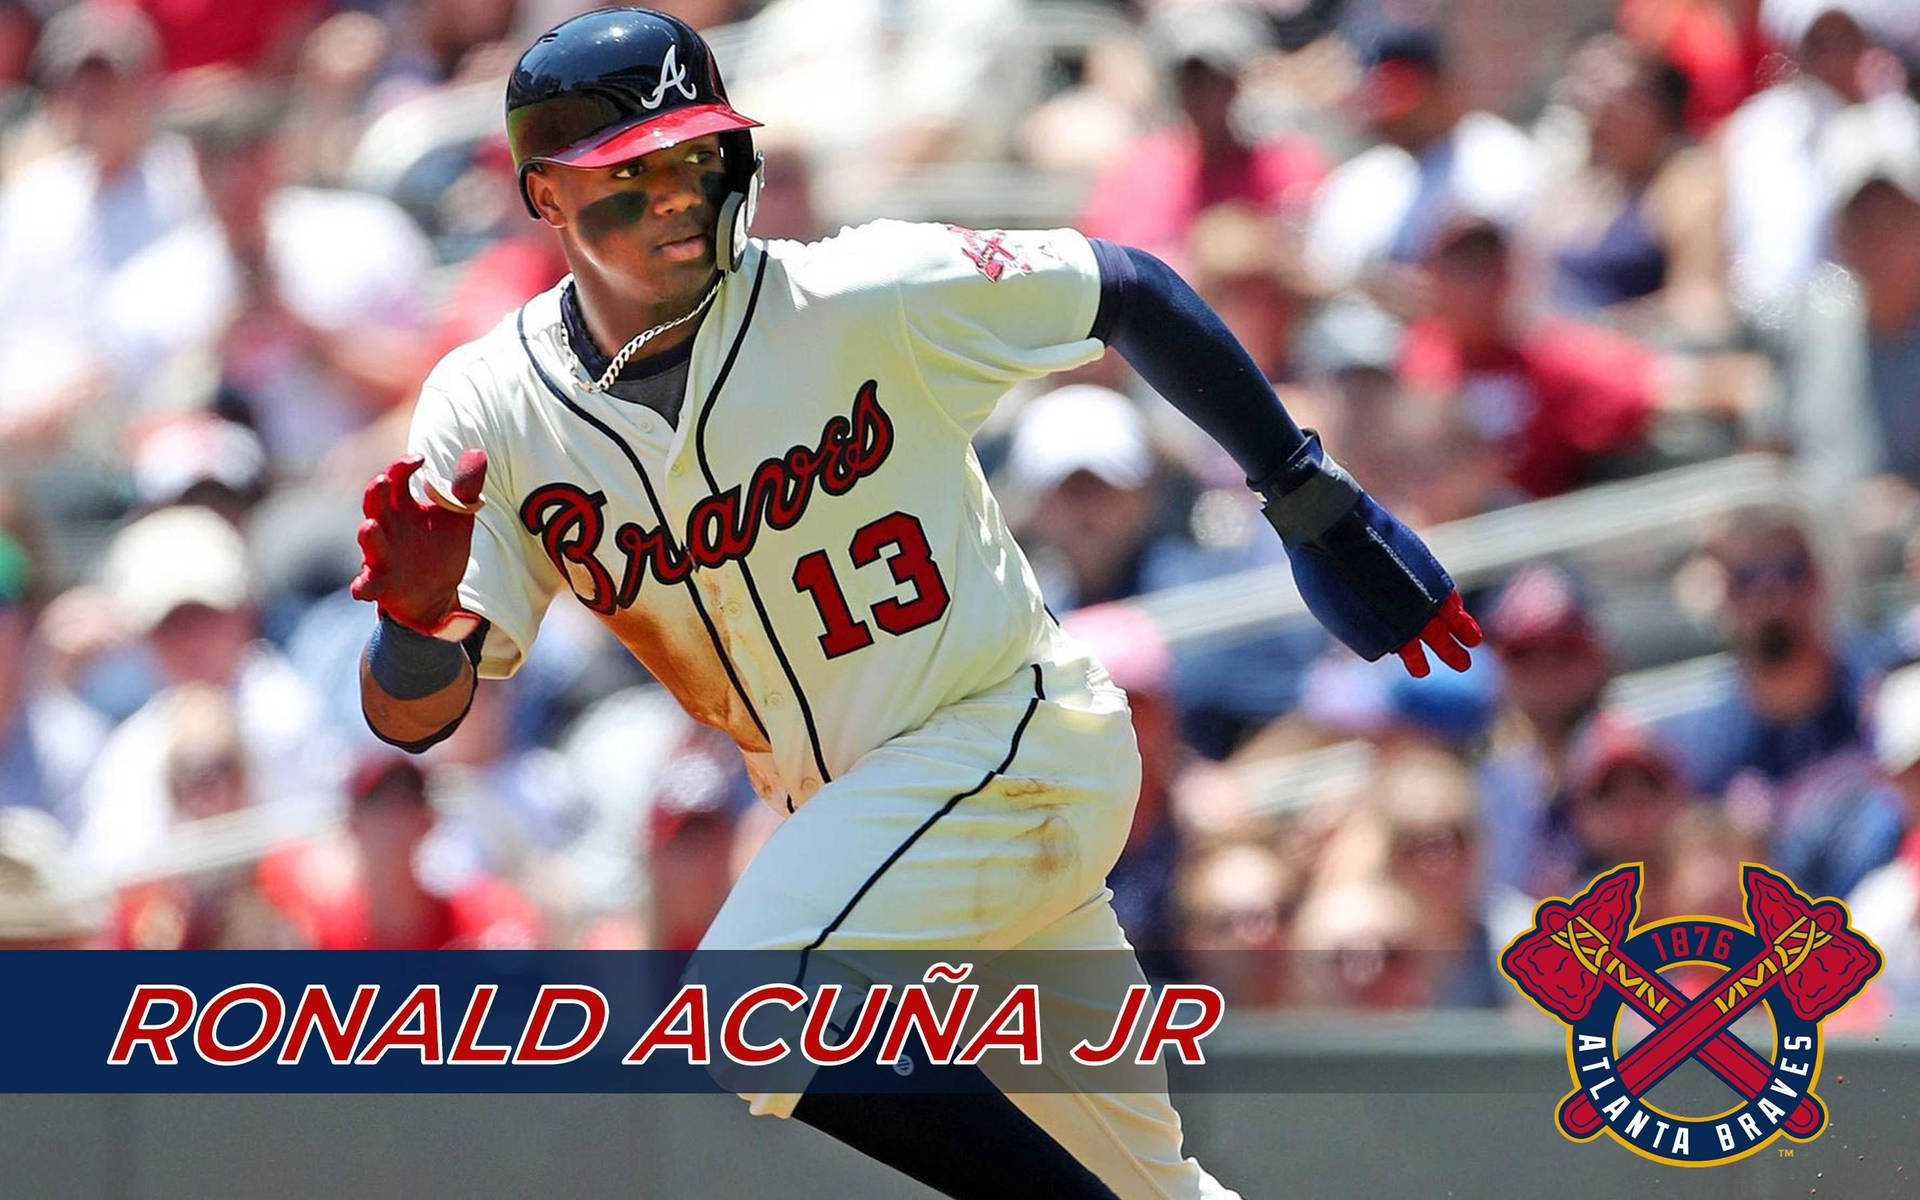 Ronald Acuna Jr. Name Banner Background